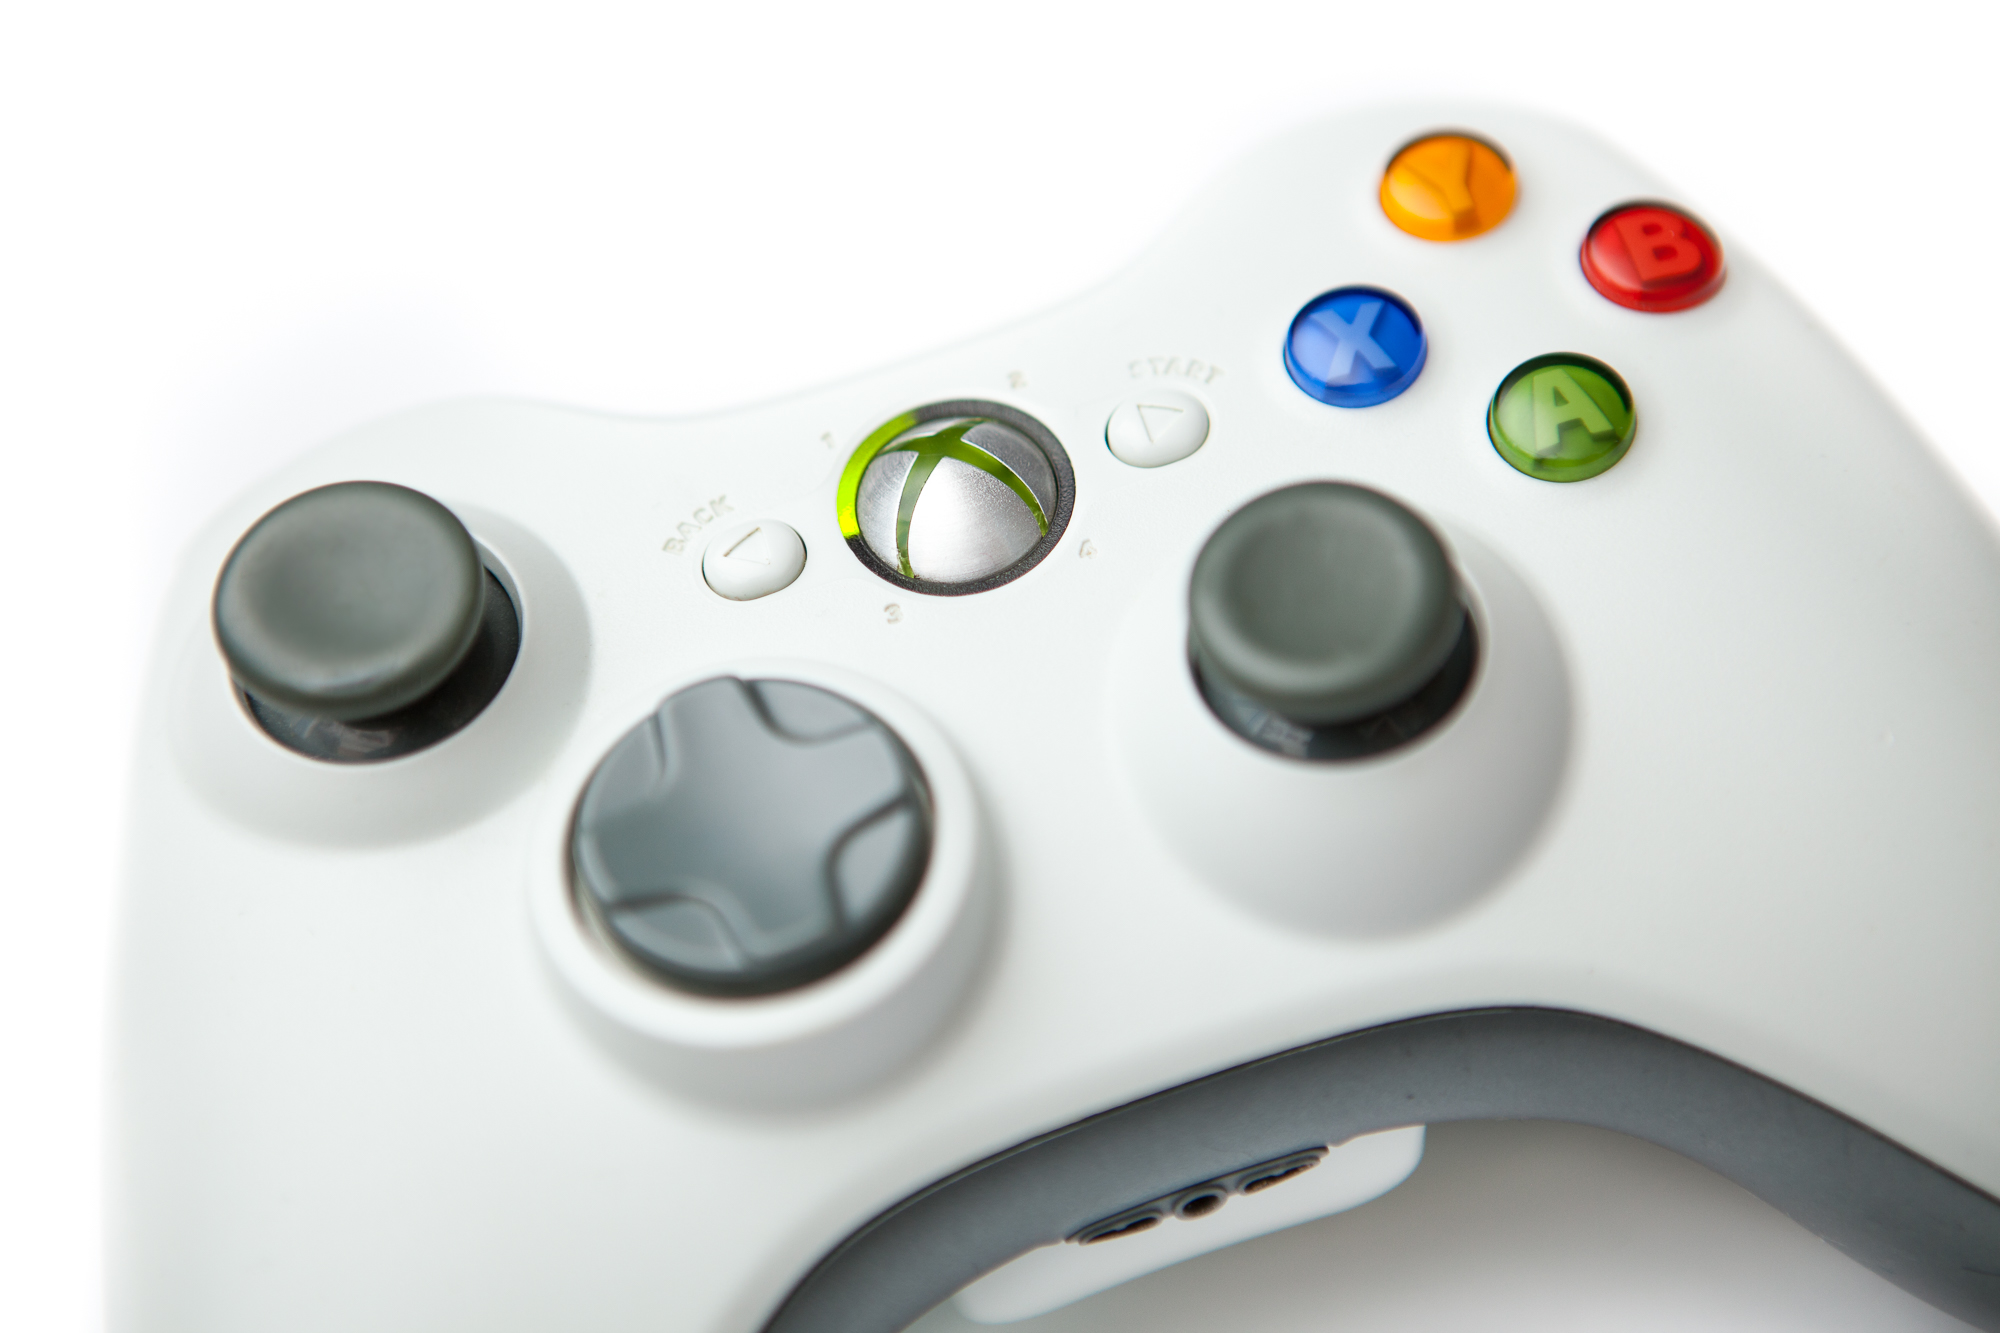 Do Xbox 360 Controllers Work on Xbox One? No, They Do Not